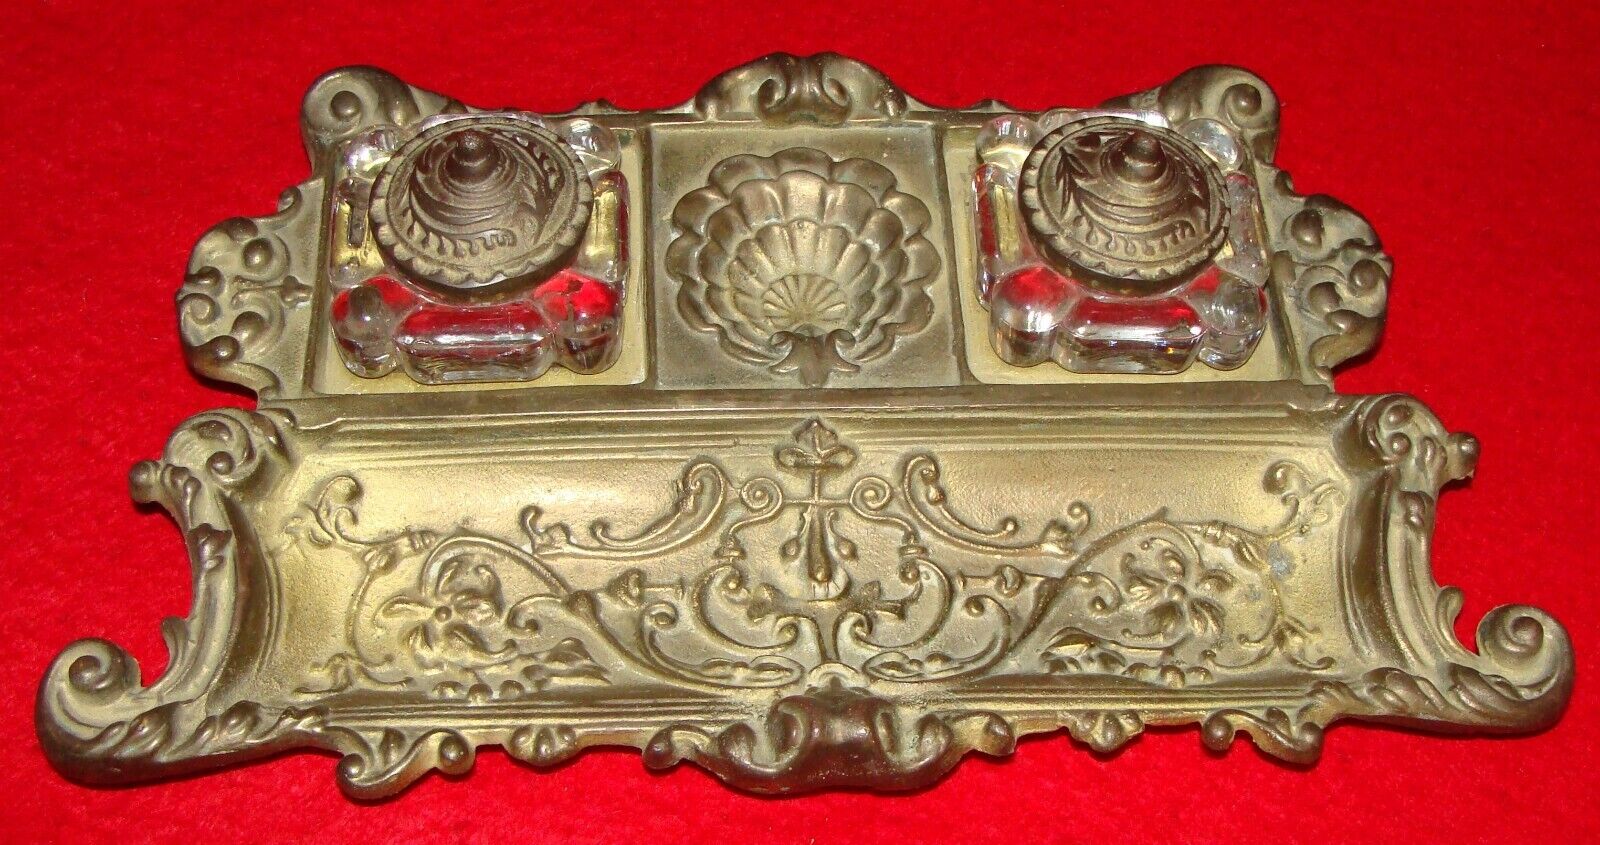 Antique Brass Double Inkwell & Pen Stand w/ Glass Inkwells & Lids Desk Accessory